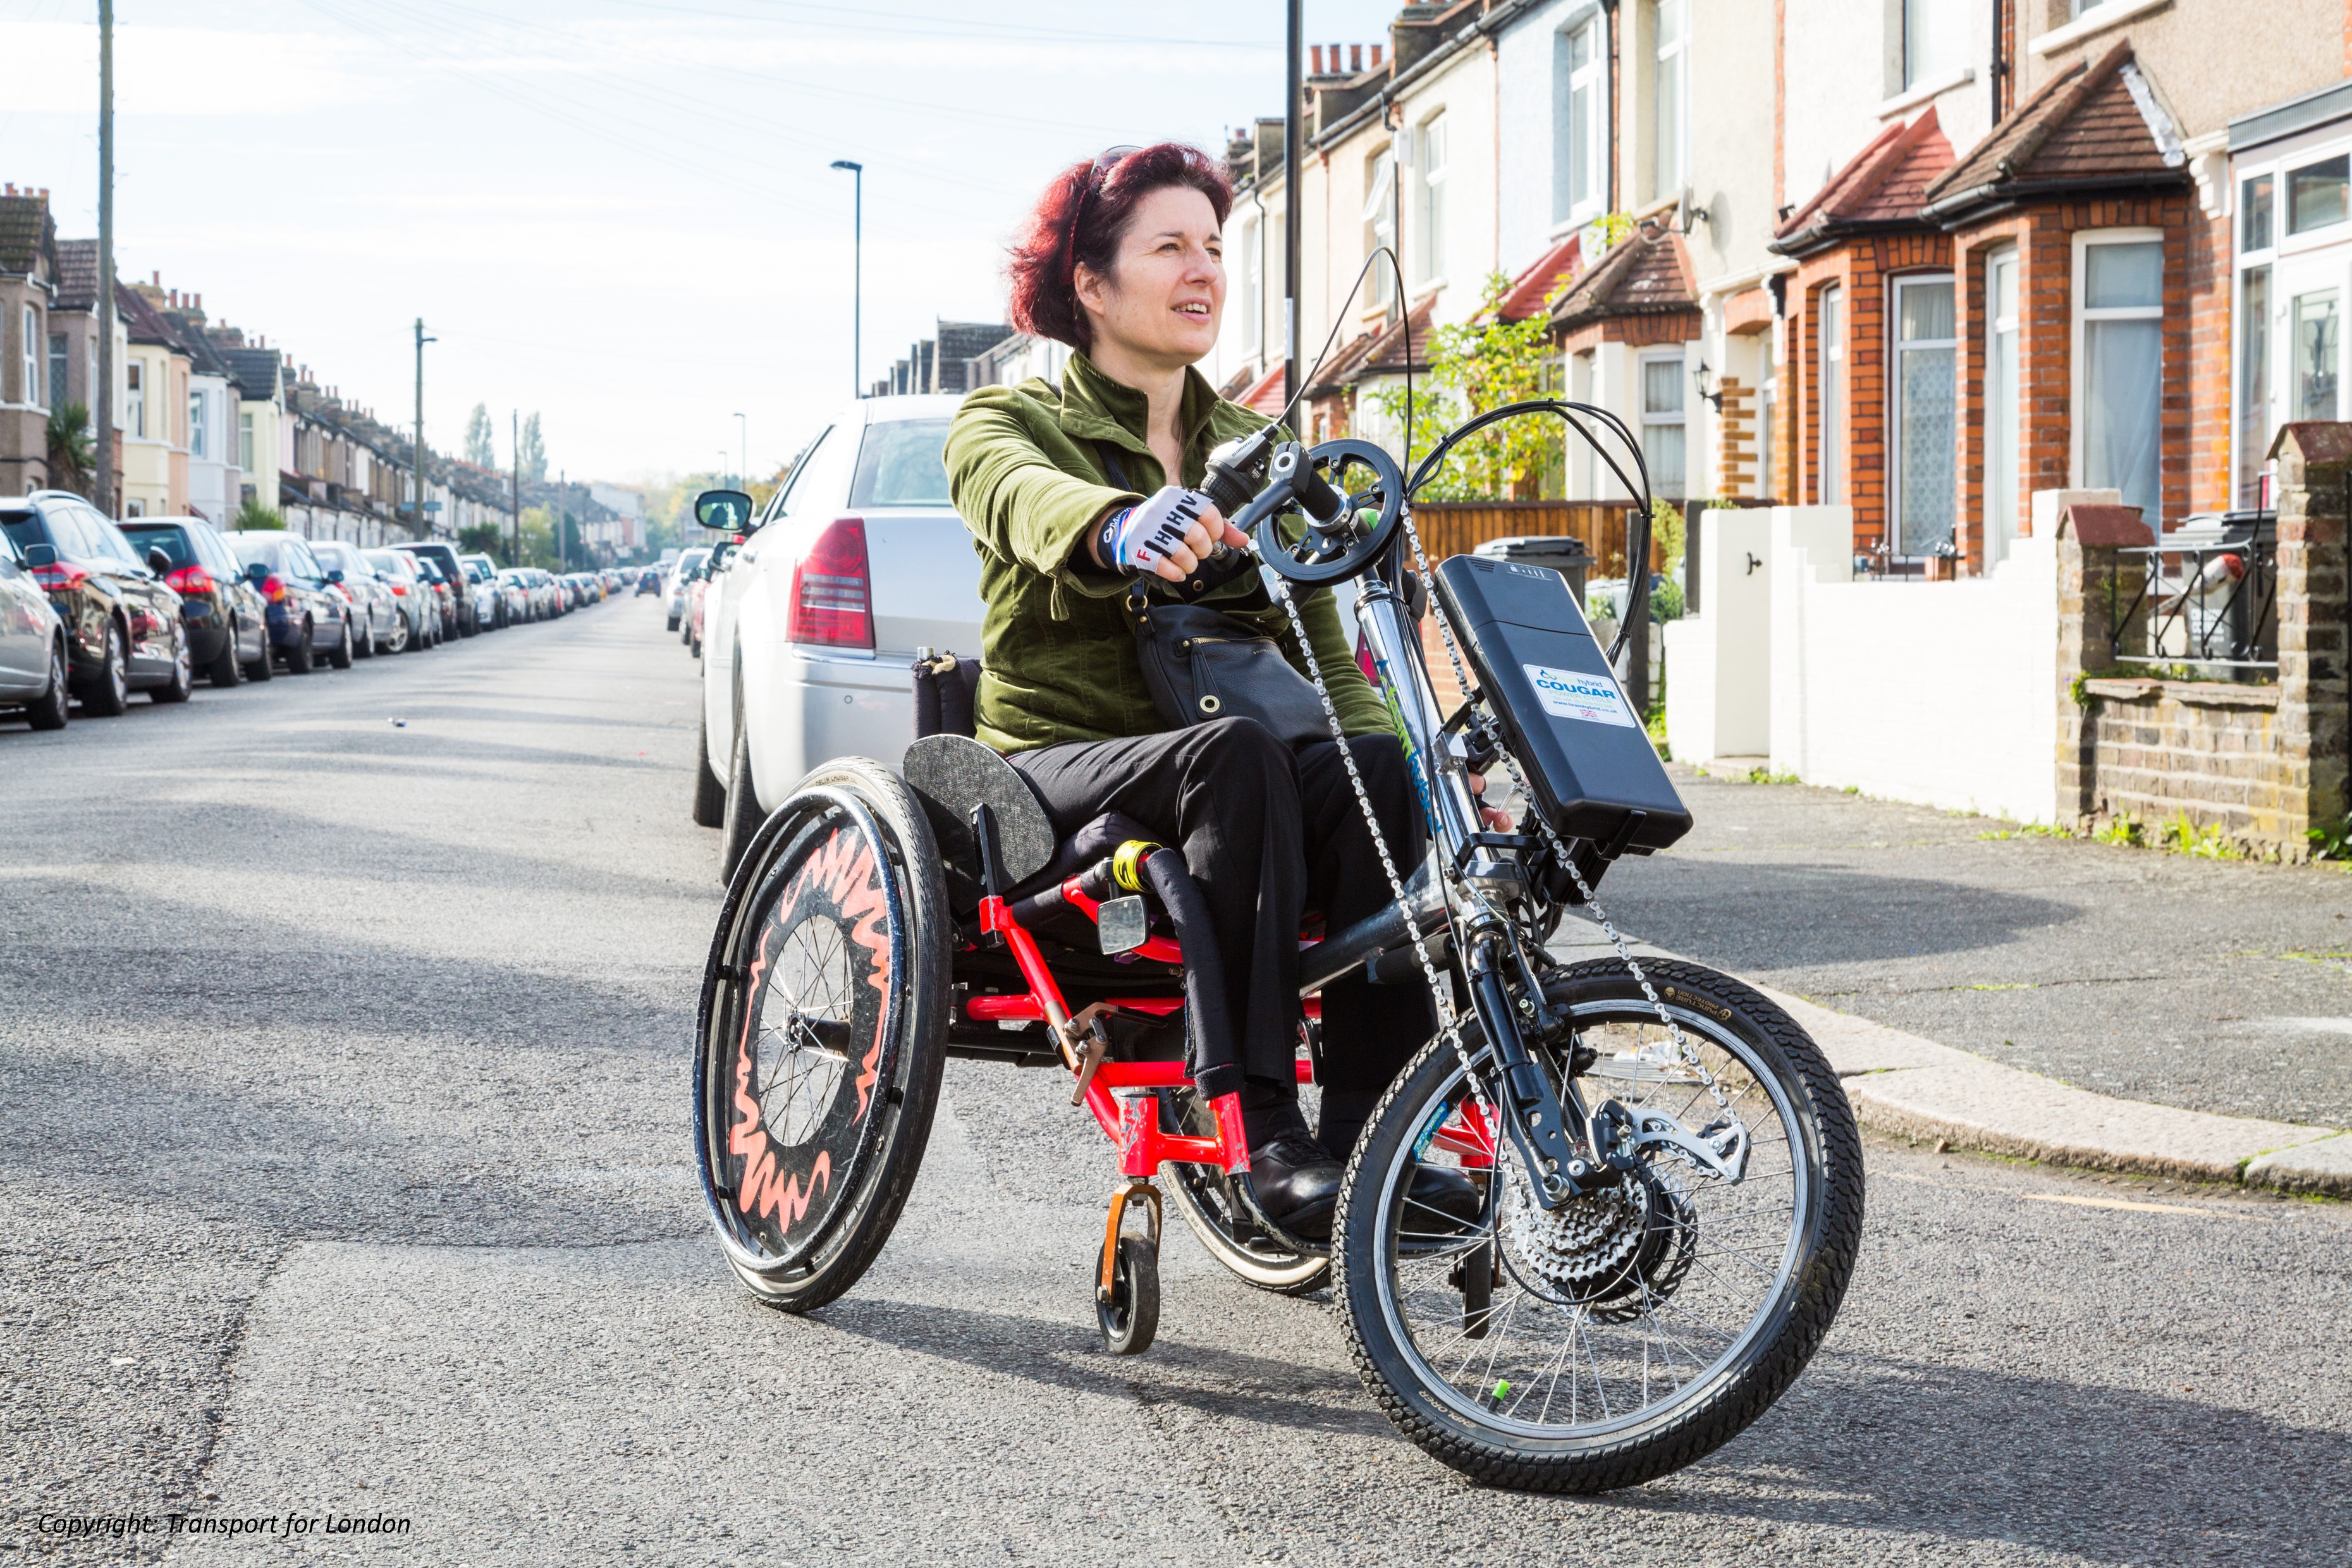 Green Commute Initiative is an all-inclusive cycle to work scheme with no £1,000 limit, meaning that if you are unable to ride a standard bike due to mobility issues, then you can get a specialised cycle, trike or adapted cycle through GCI.